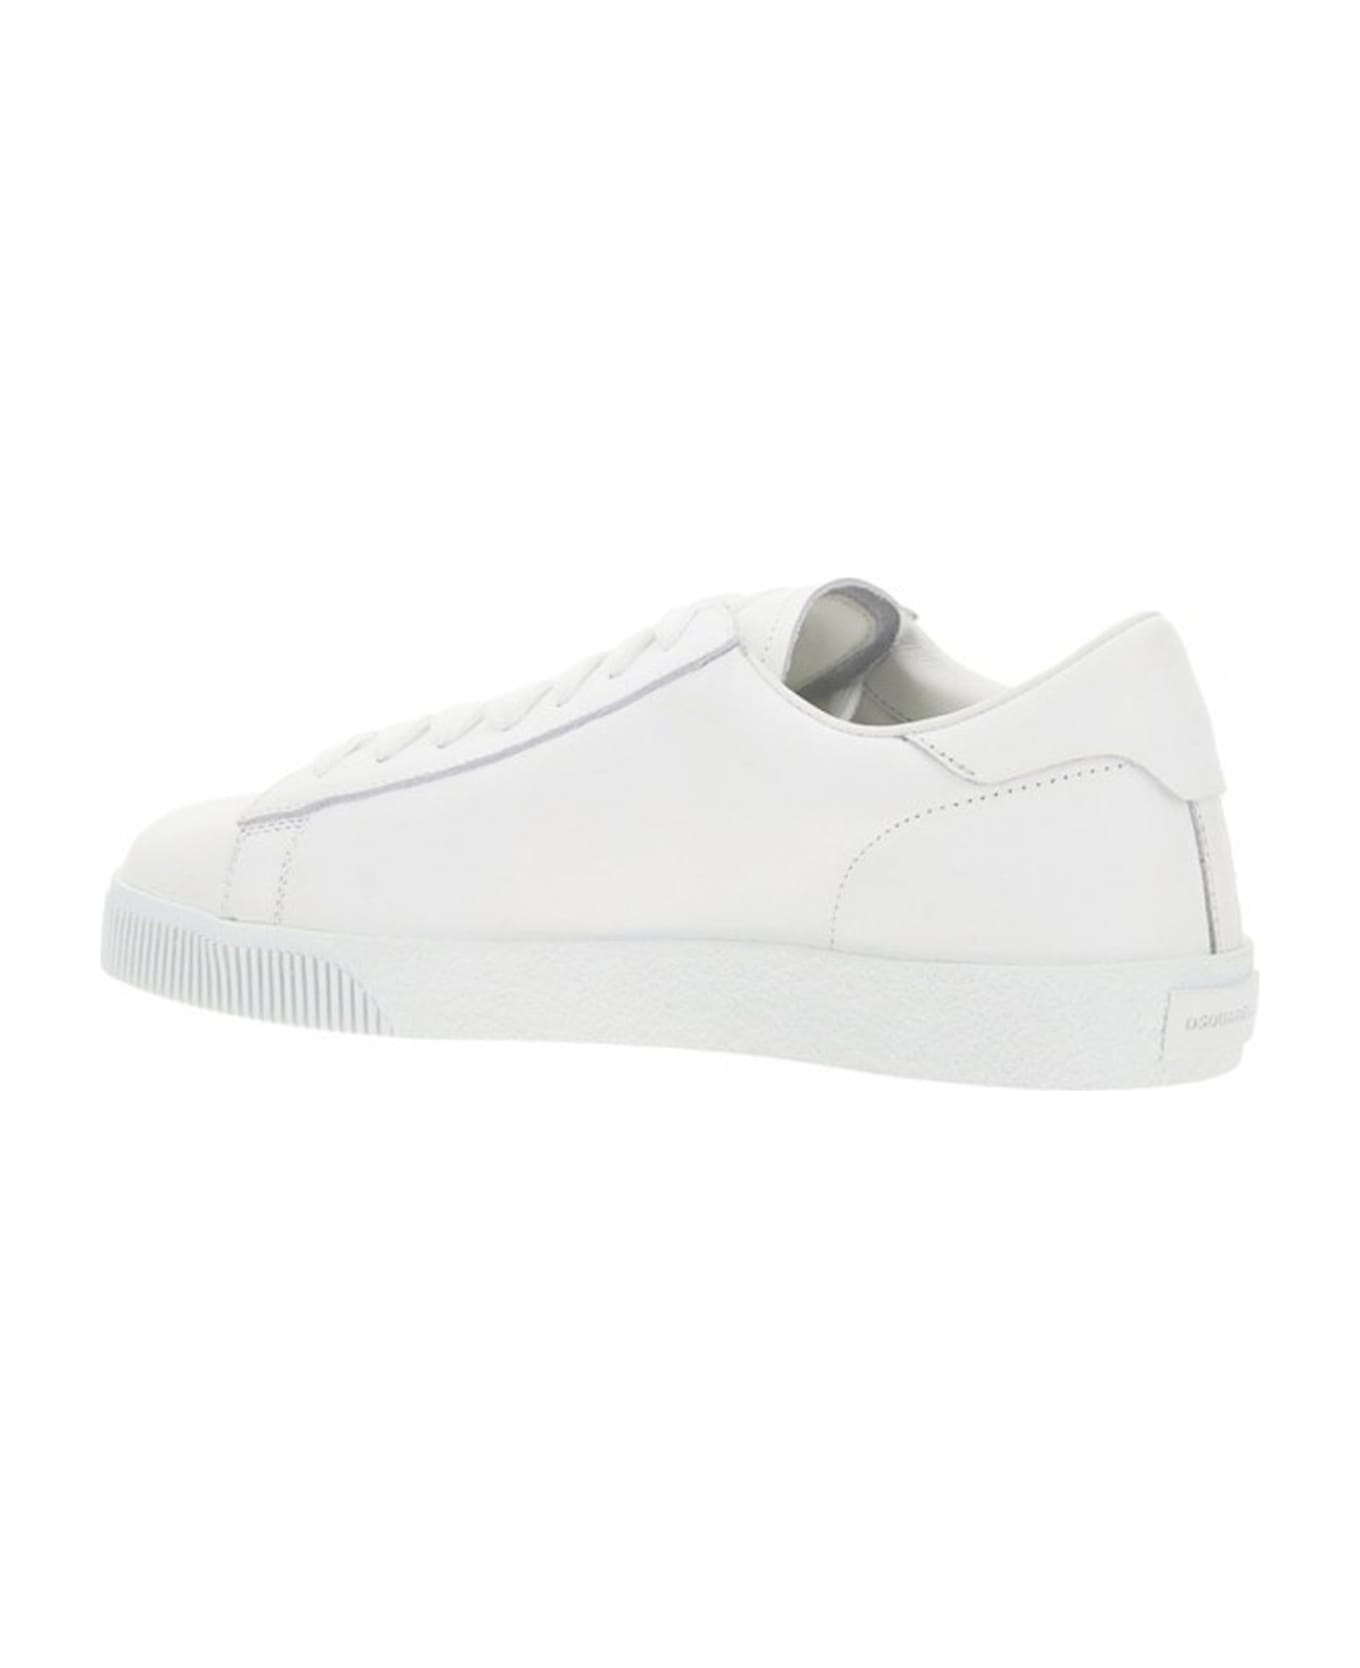 Dsquared2 Printed Leather Sneakers - White